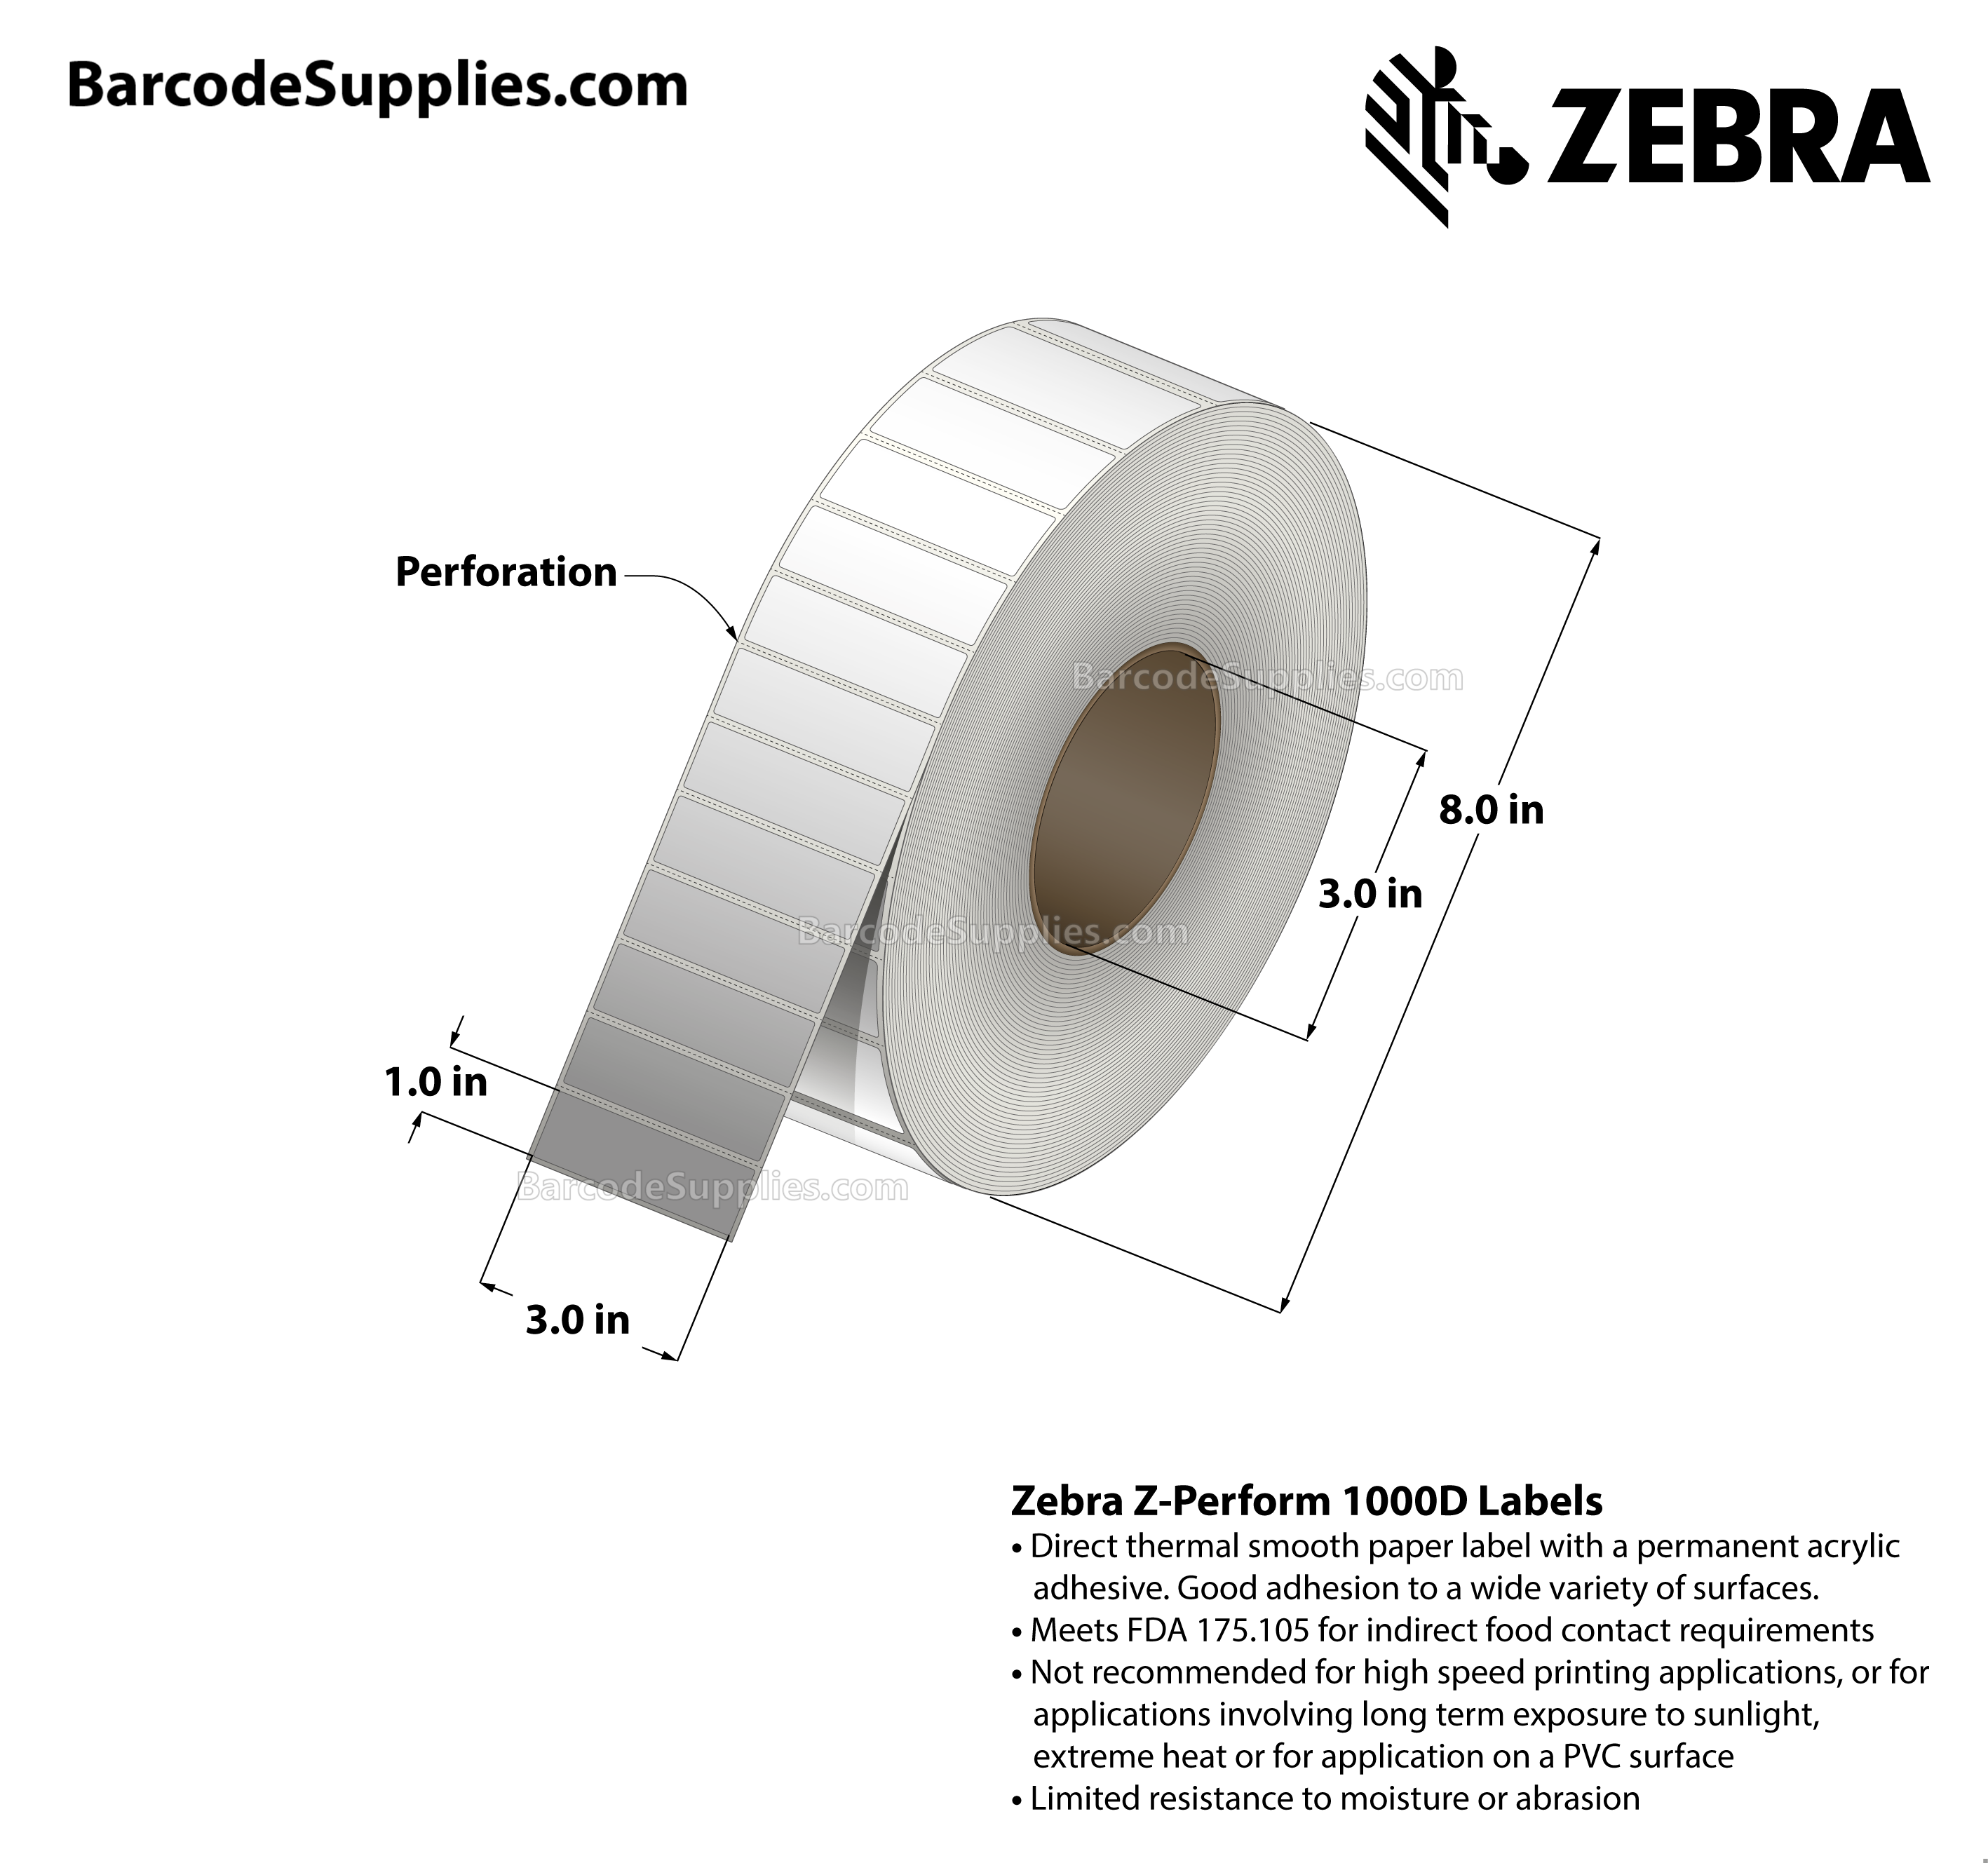 3 x 1 Direct Thermal White Z-Perform 1000D Labels With Permanent Adhesive - Perforated - 5500 Labels Per Roll - Carton Of 6 Rolls - 33000 Labels Total - MPN: 10000303